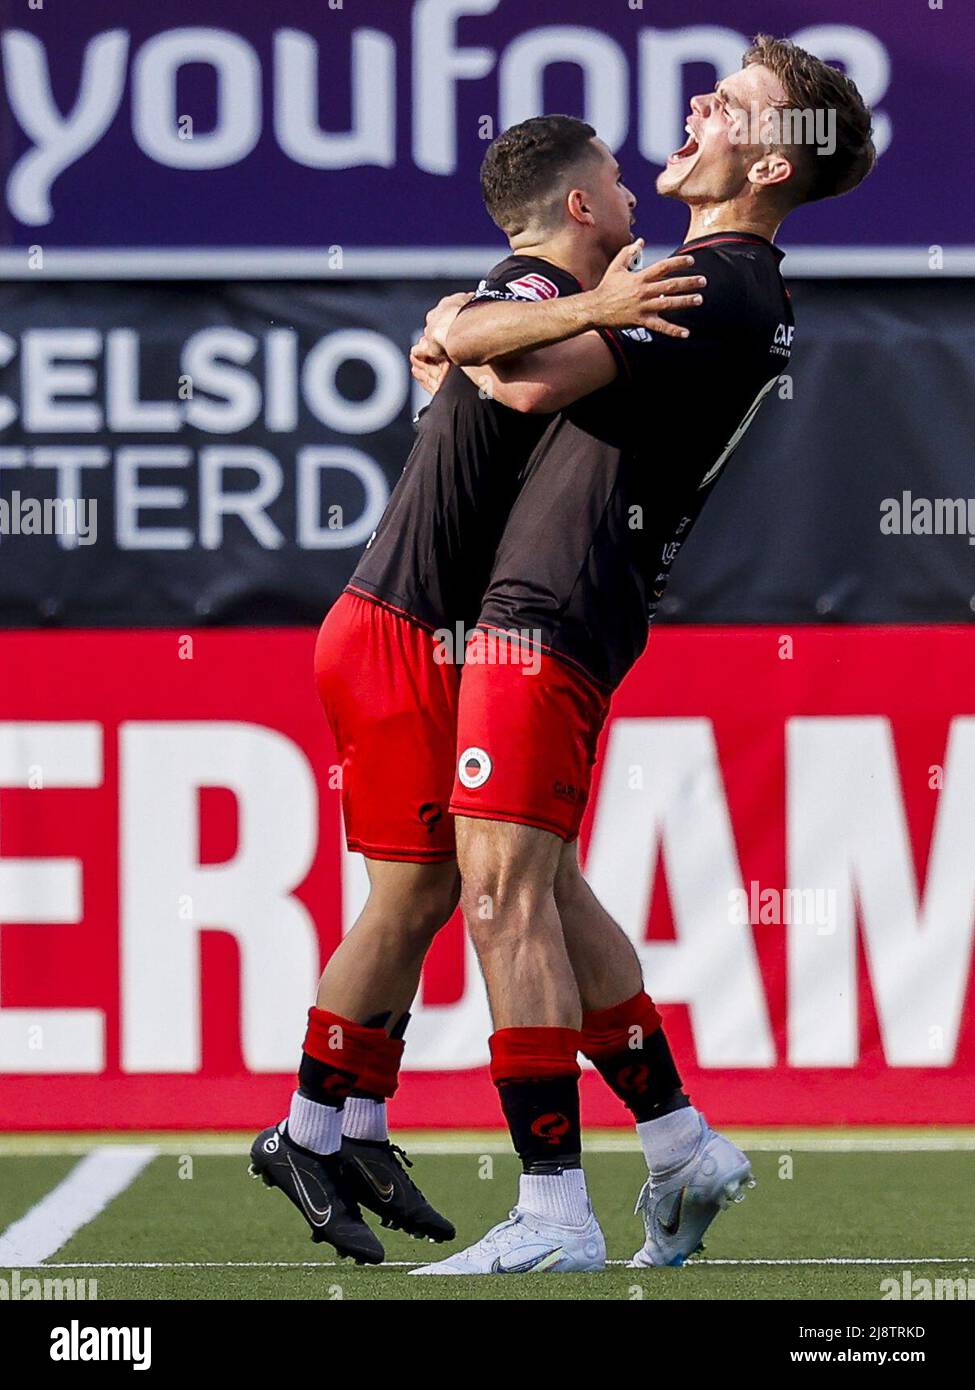 ROTTERDAM - Marouan Azarkan of sbv Excelsior and Thijs Dallinga of sbv Excelsior celebrate the 1-0 during the Dutch play-offs promotion/relegation match between Excelsior and Heracles Almelo at the Van Donge & De Roo stadium on May 18, 2022 in Rotterdam, Netherlands. ANP PIETER STAM DE YOUNG Stock Photo